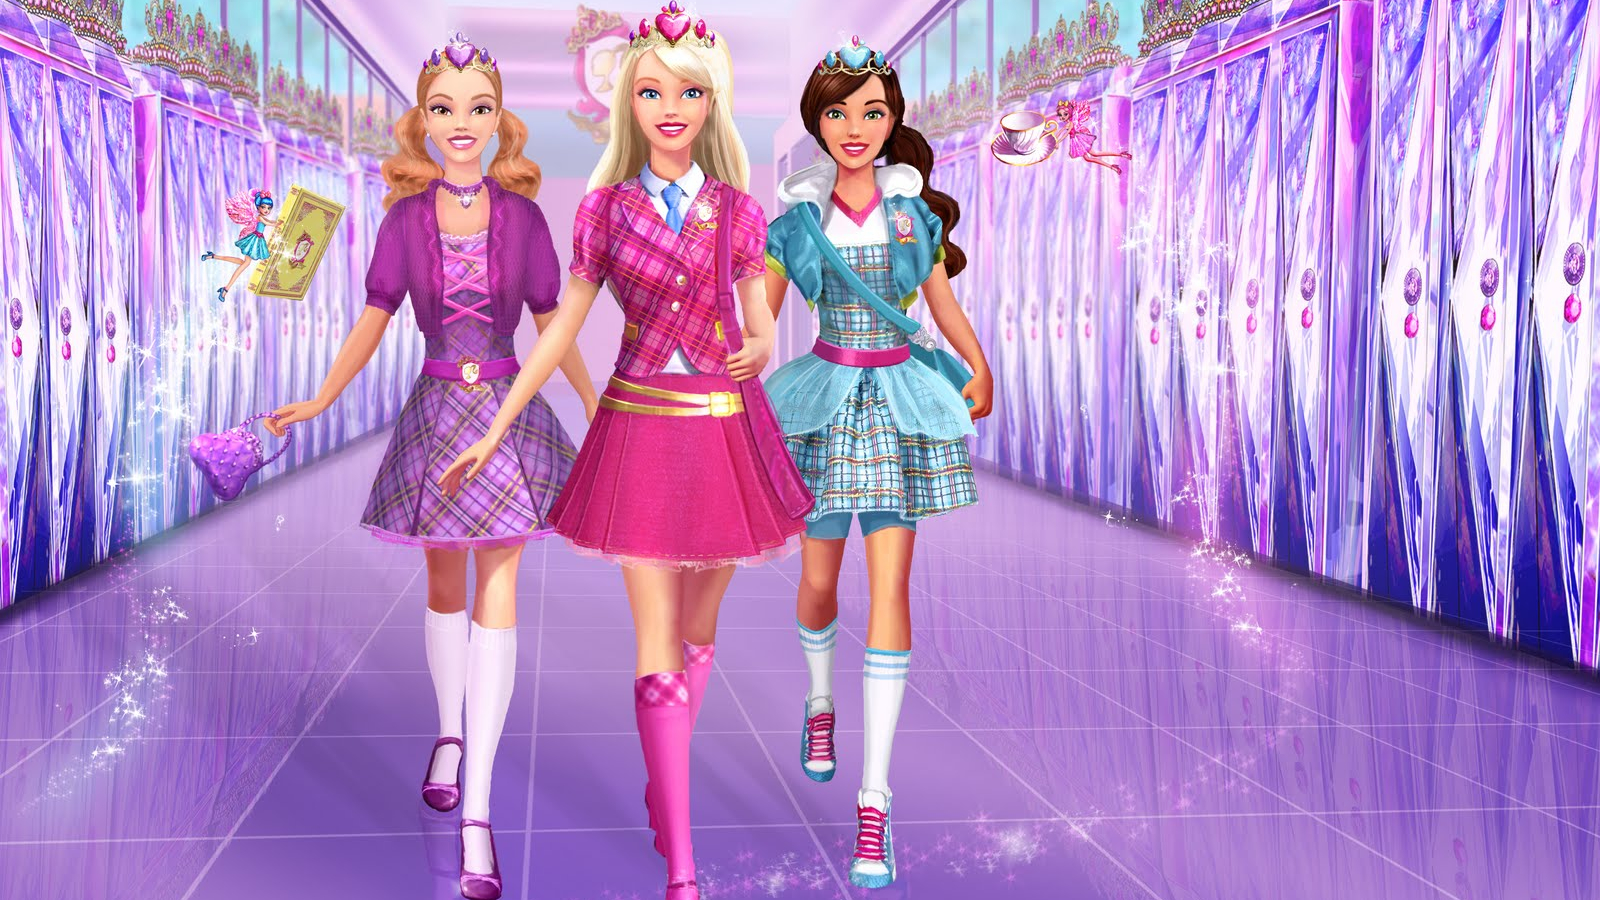 Free download barbie wallpapers 99 barbie princess wallpapers [1600x1200] for your Desktop, Mobile & Tablet